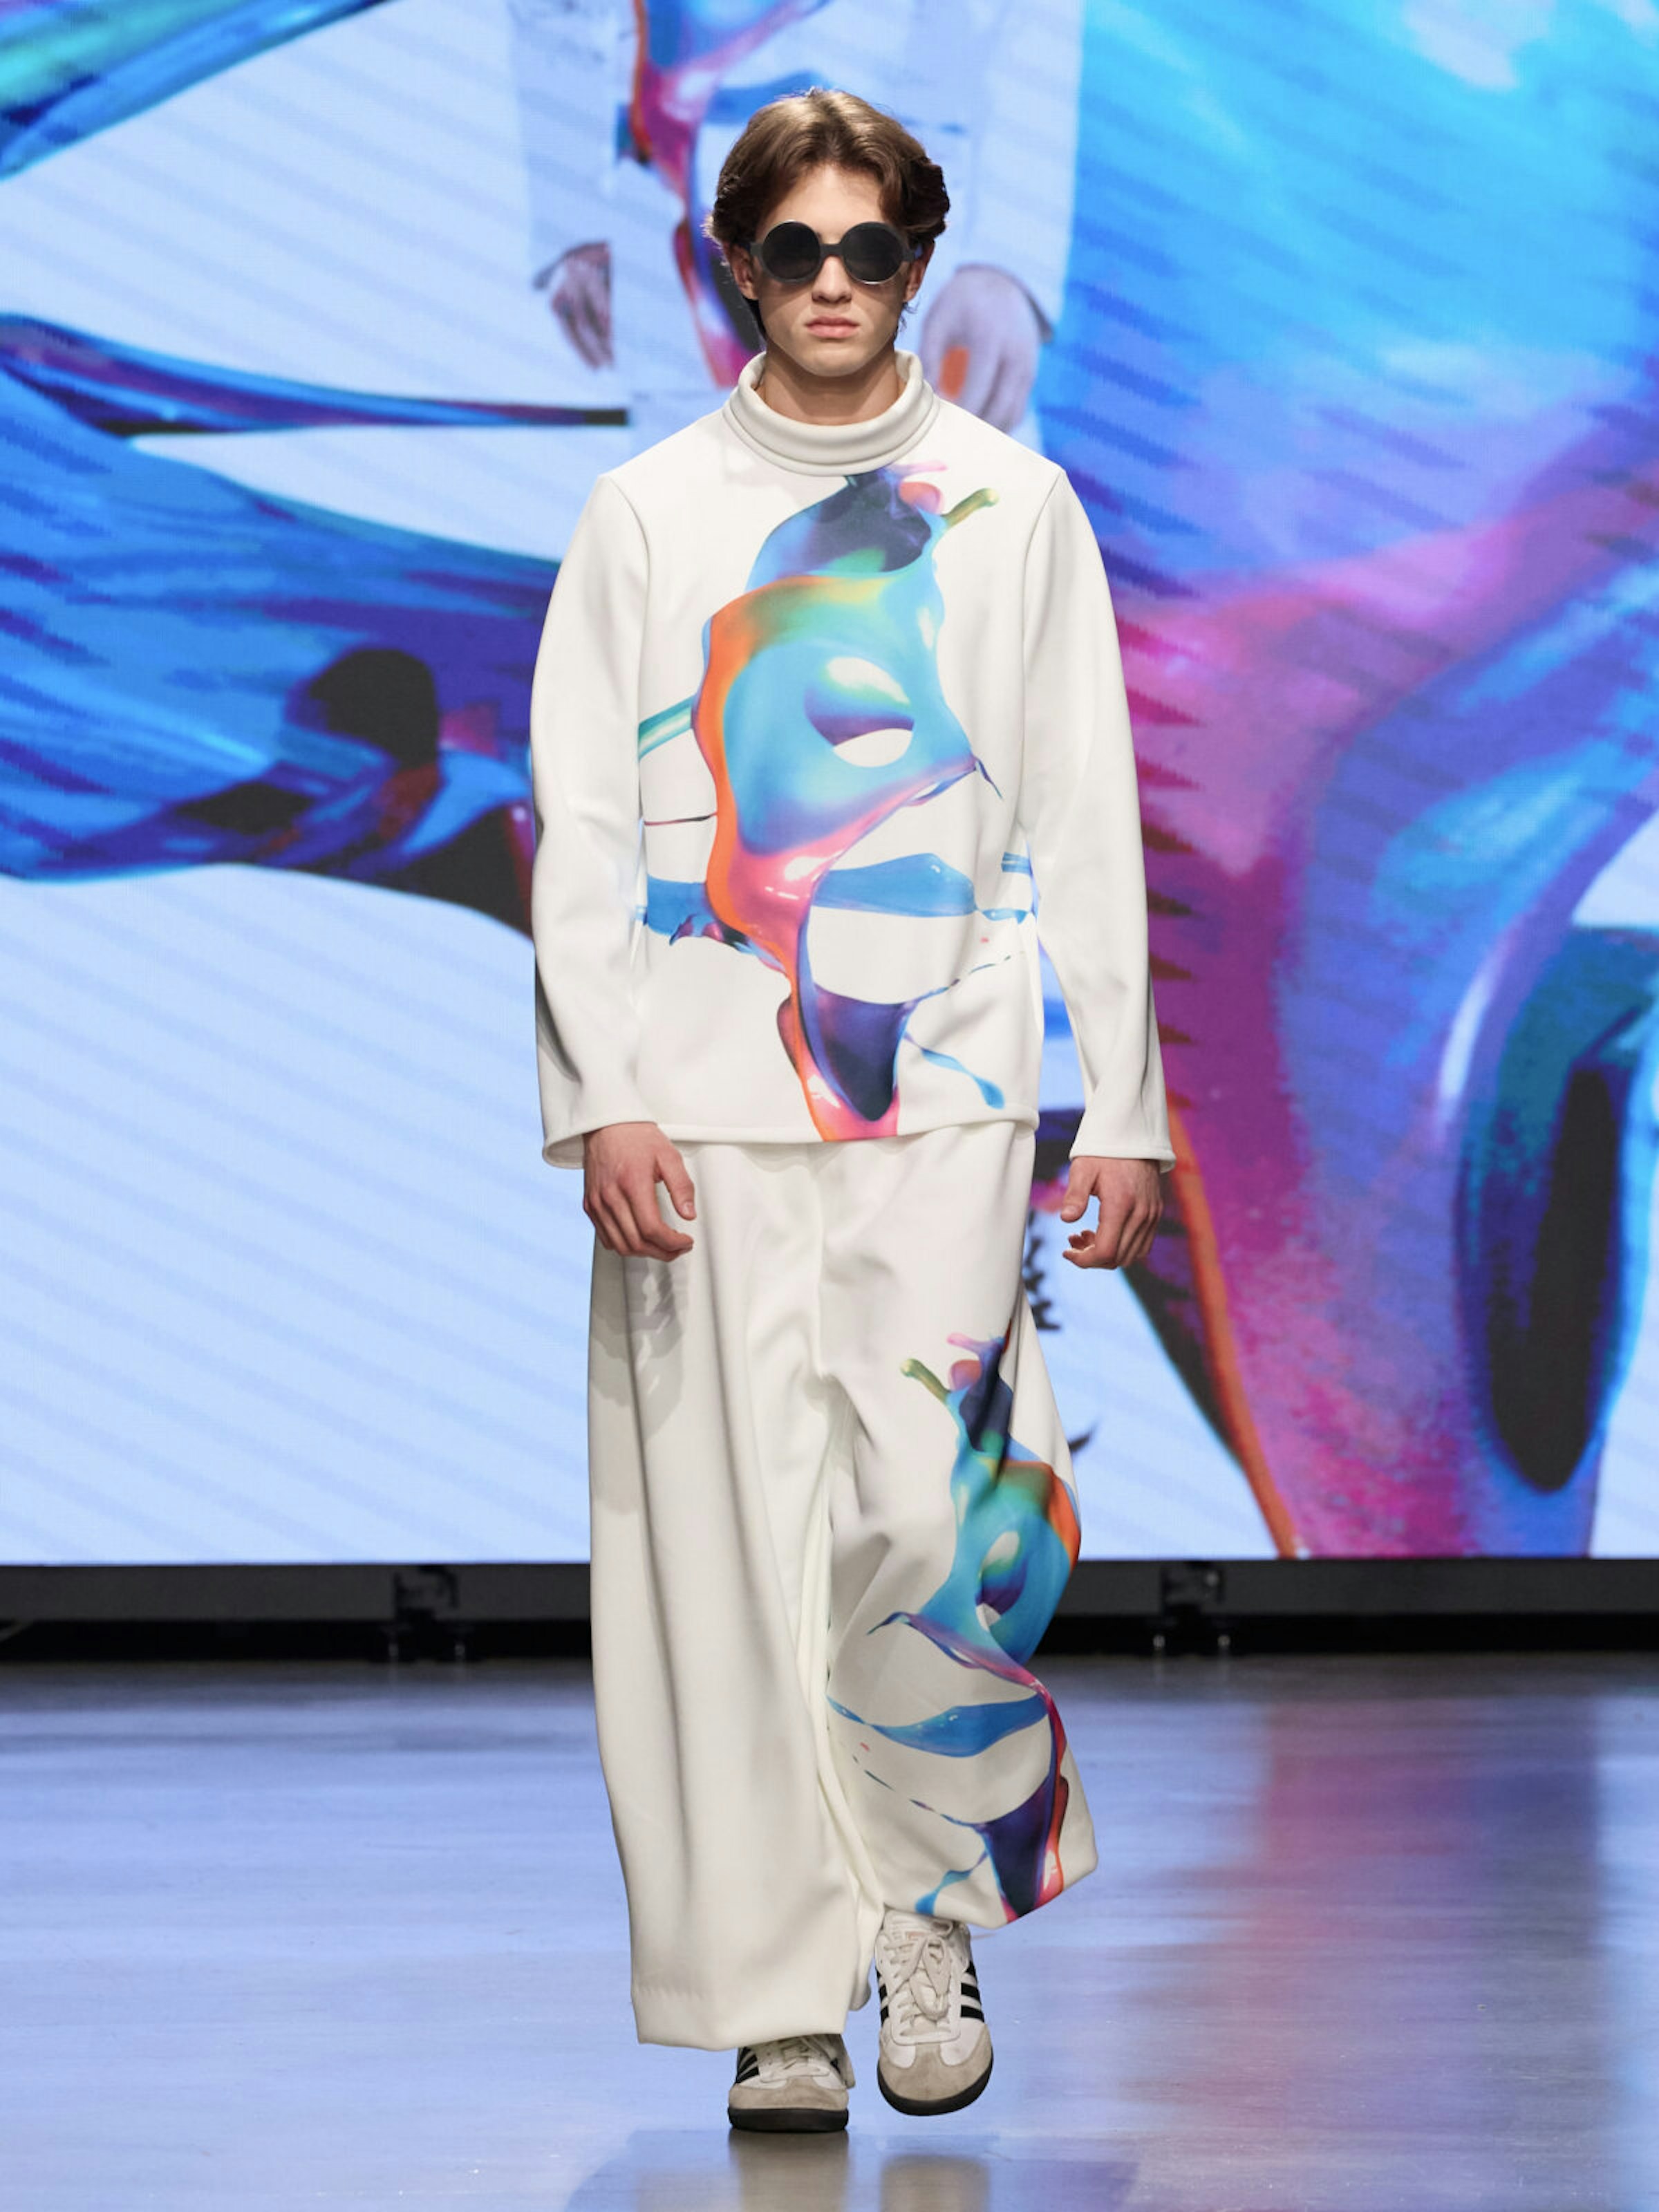 The 'Sound of Ikebana' collection presented at NYFW in February